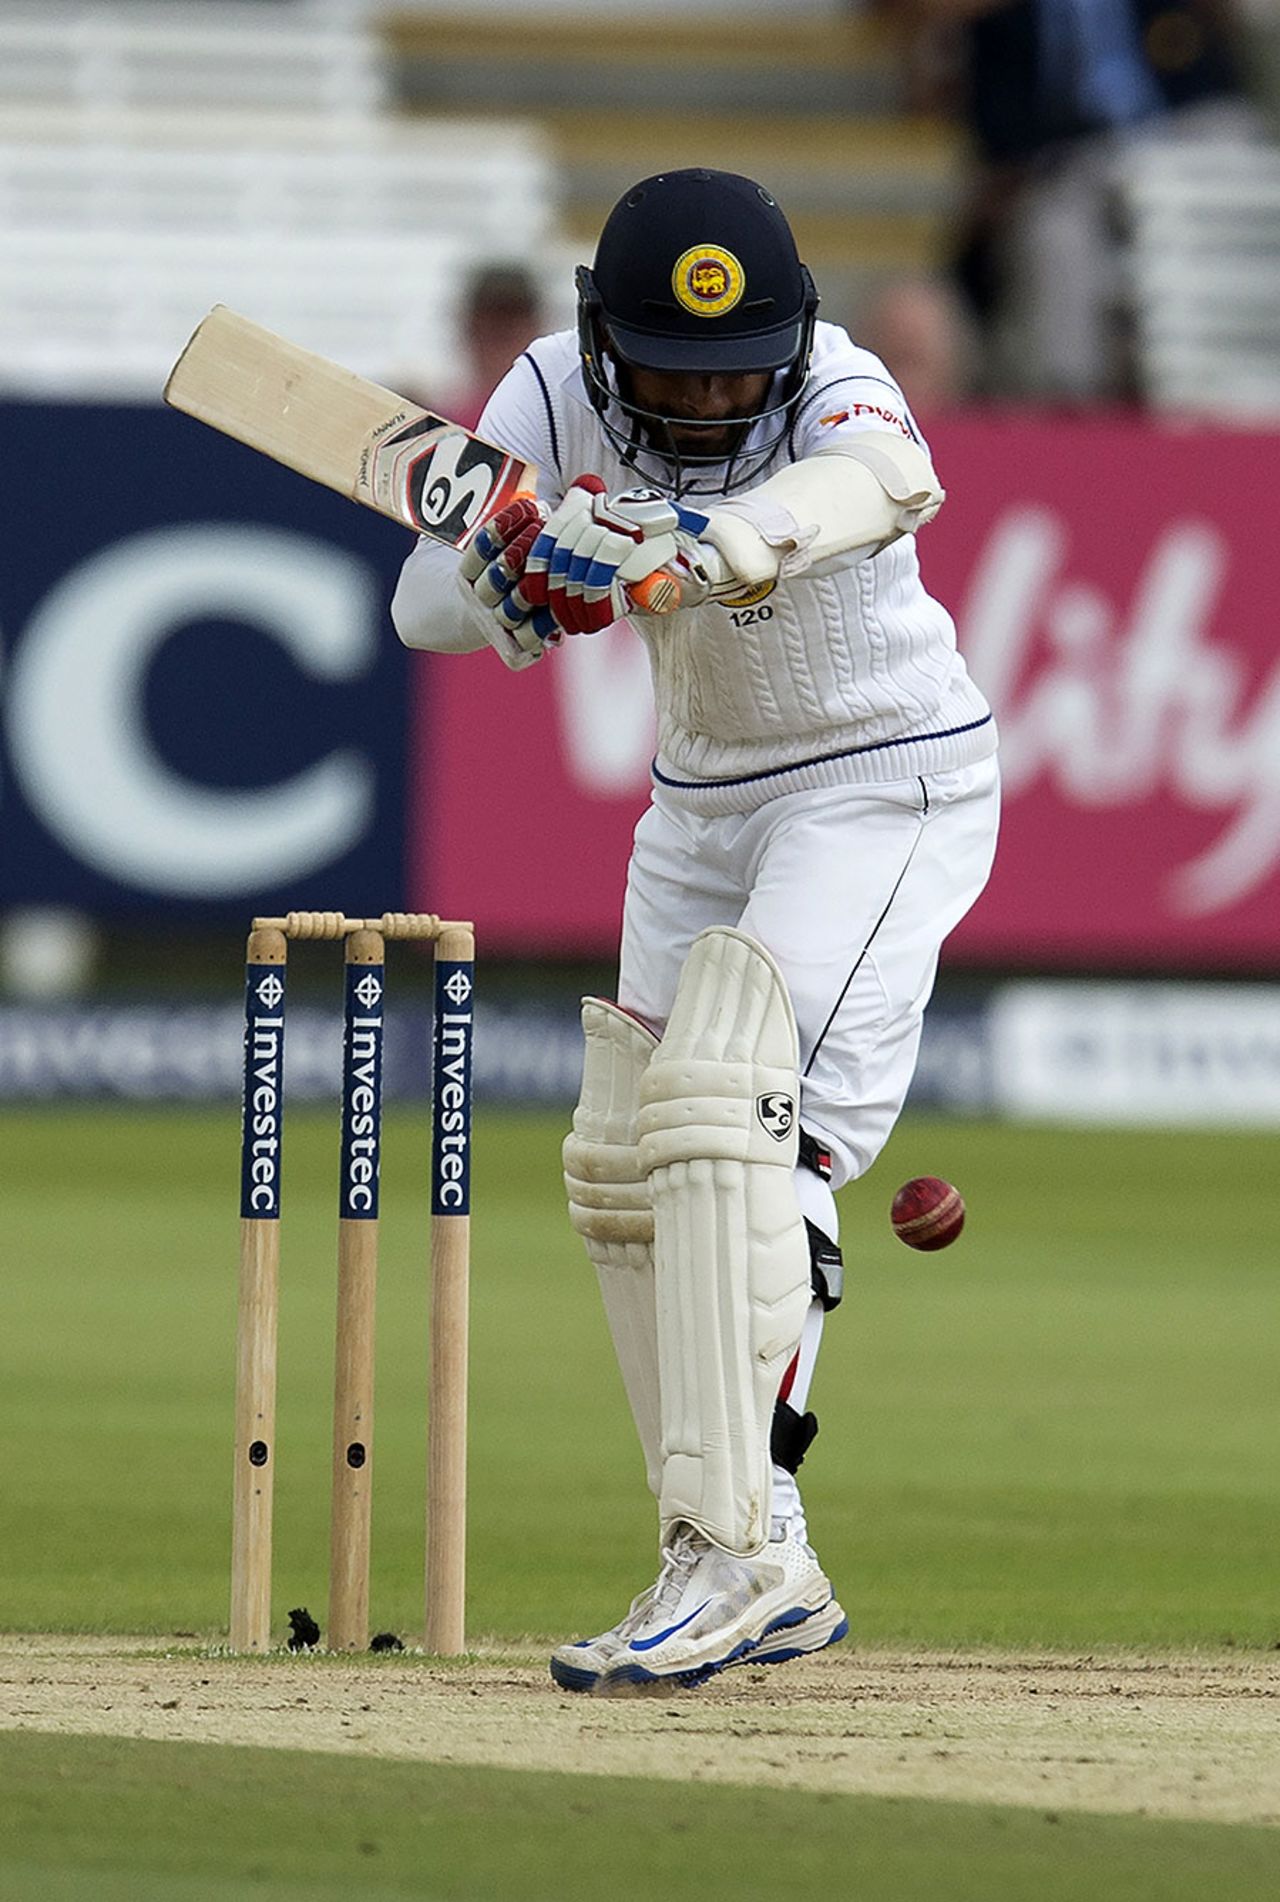 Kaushal Silva padded up to a big inswinger from James Anderson, England v Sri Lanka, 3rd Investec Test, Lord's, 5th day, June 13, 2016